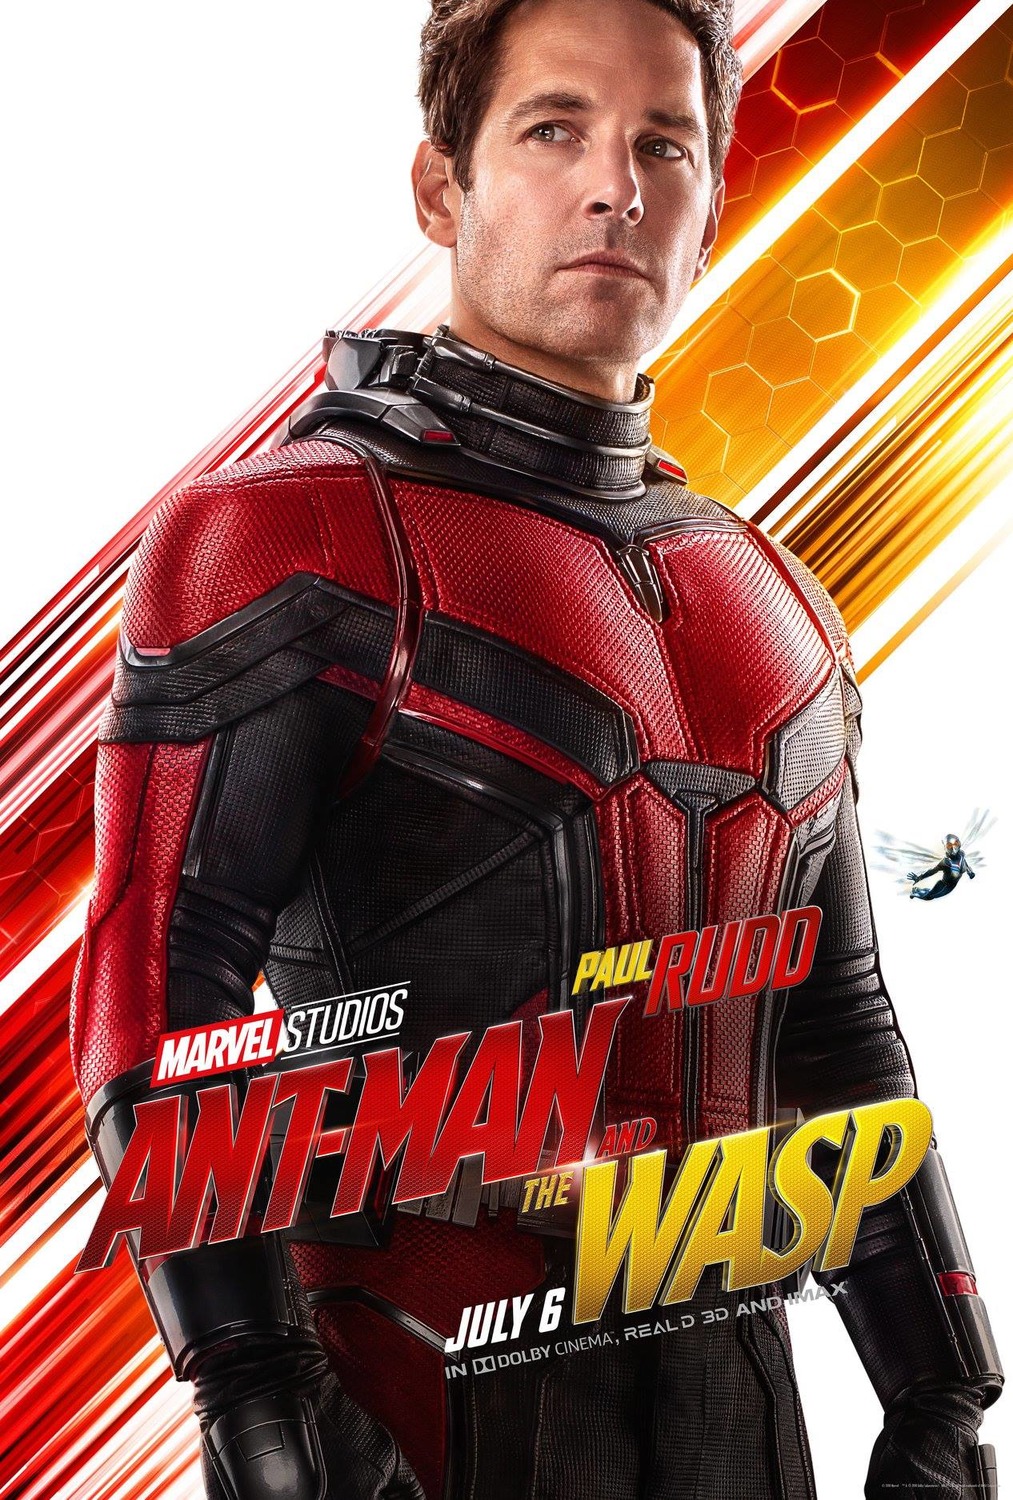 Extra Large Movie Poster Image for Ant-Man and the Wasp (#4 of 18)